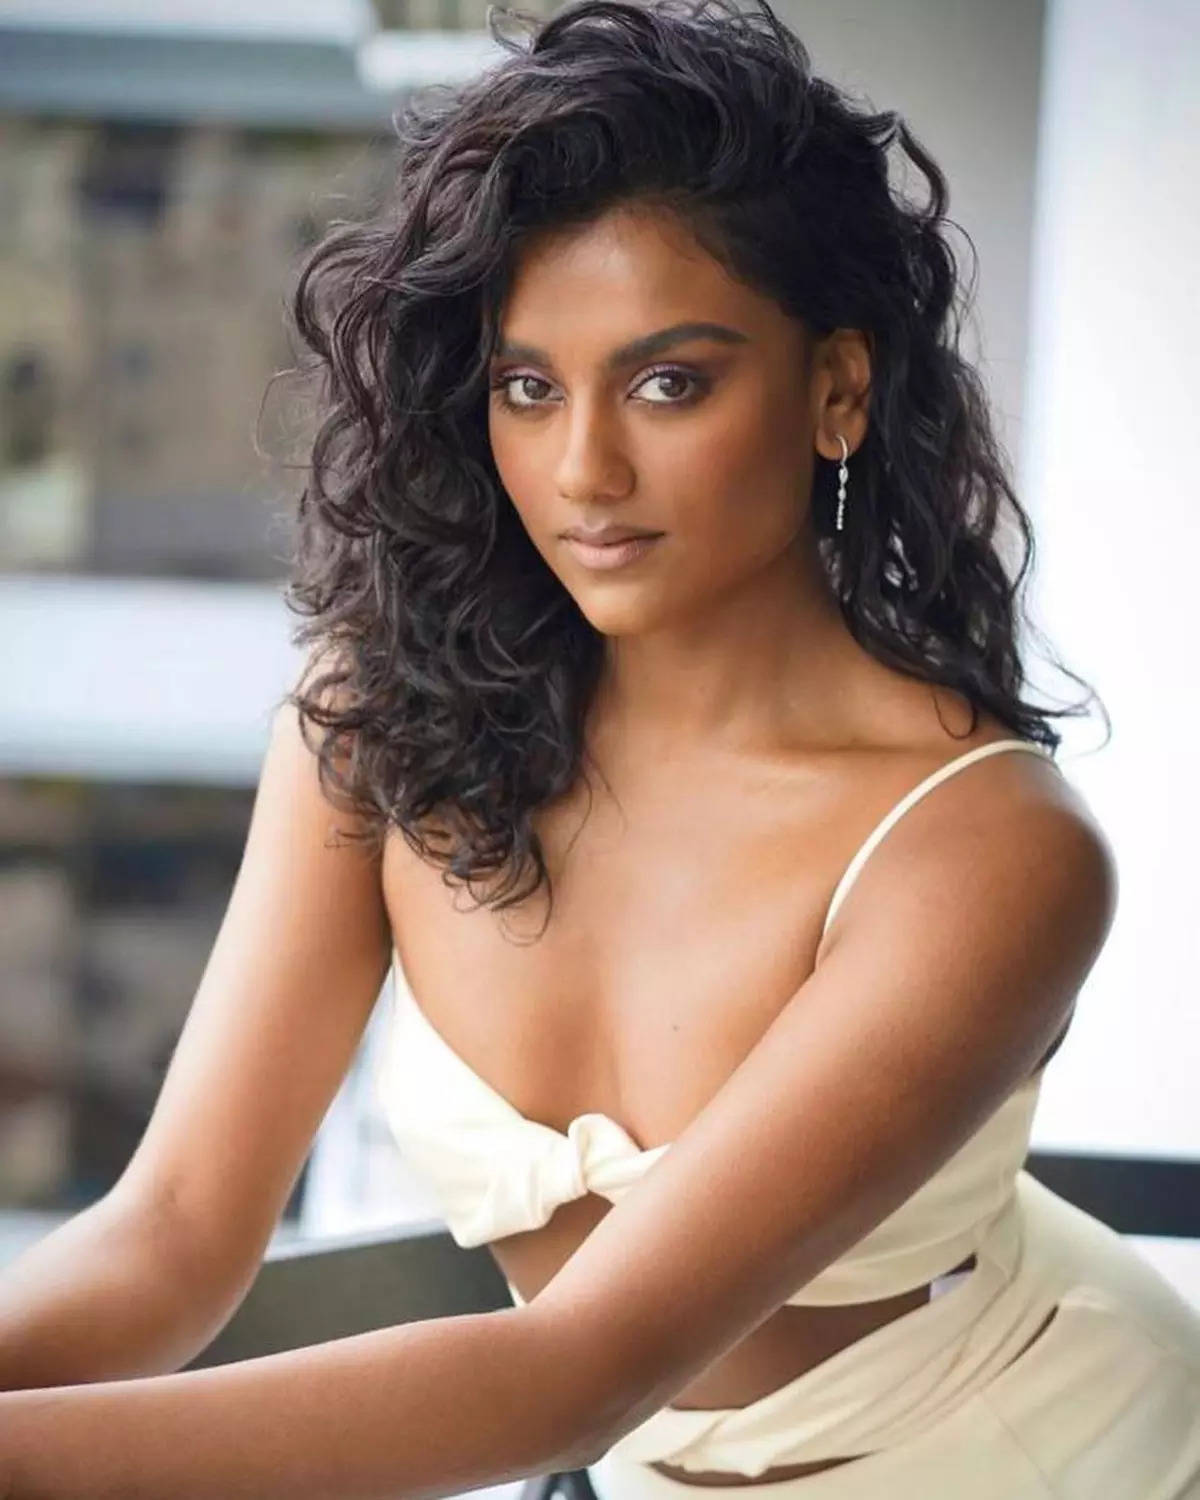 Simone Ashley, the Indian-origin British actress, leaves fans in awe with her beauty